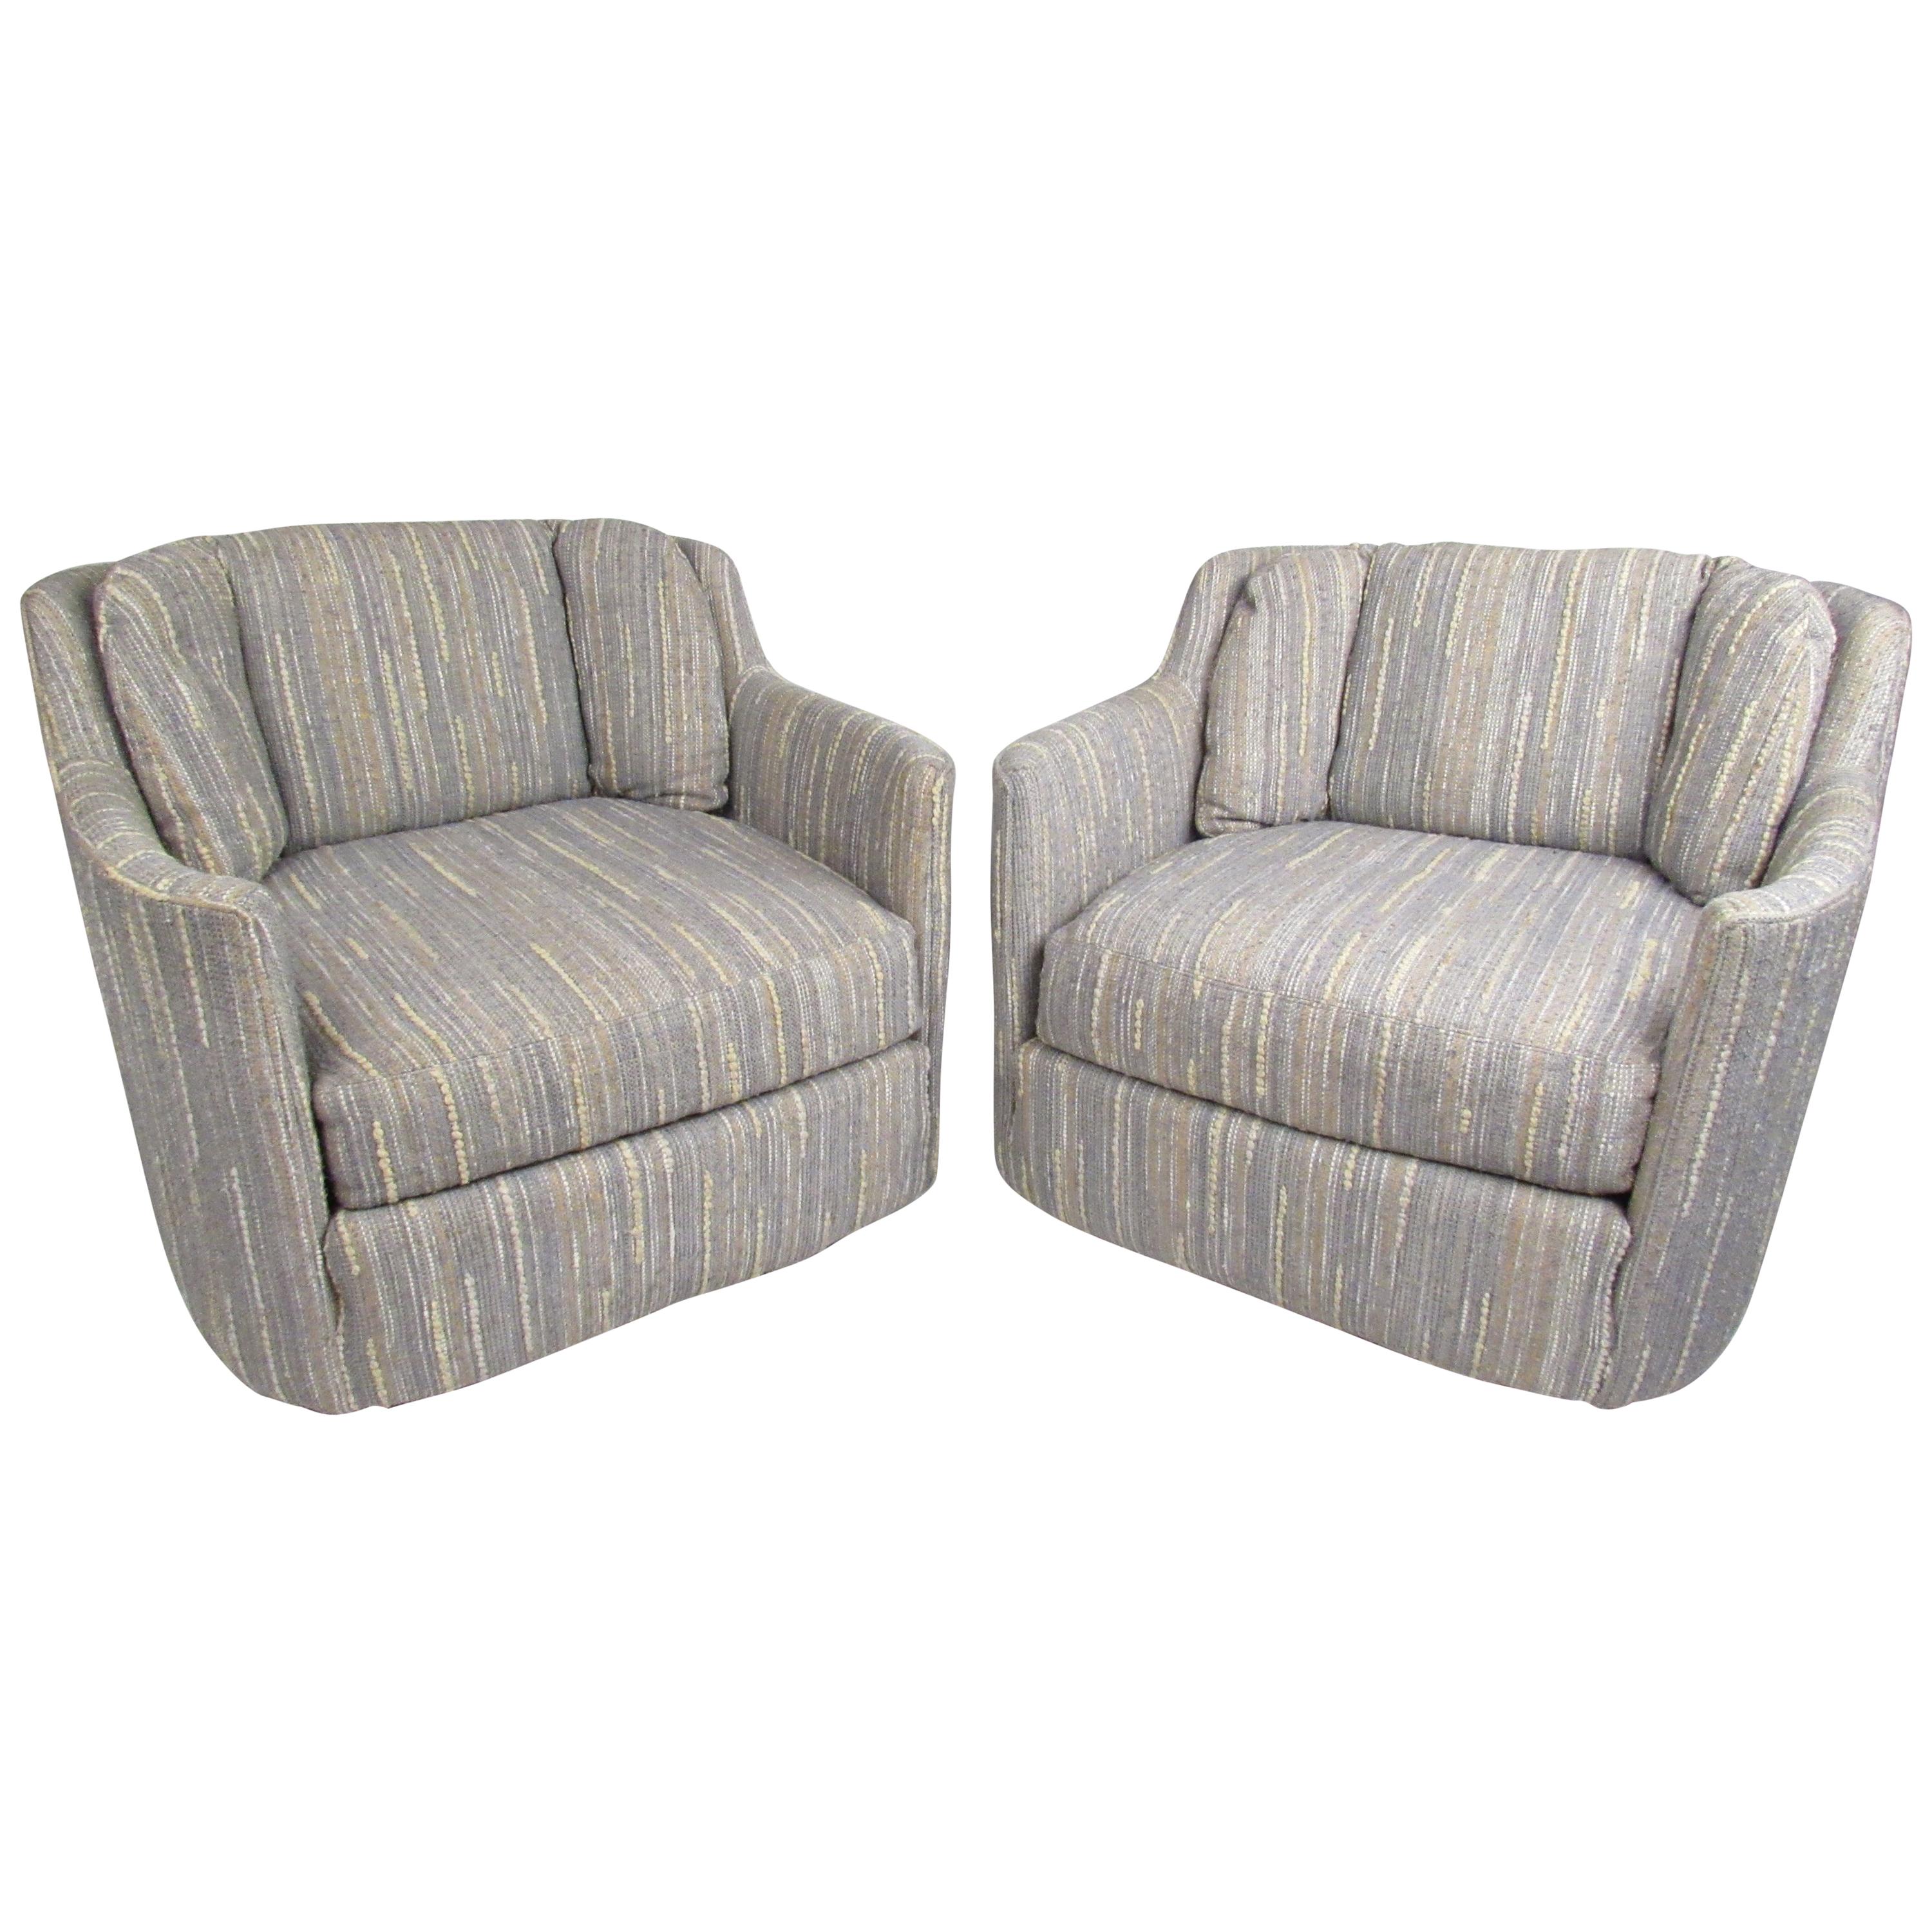 Pair of Folio 500 Lounge Chairs by Henredon